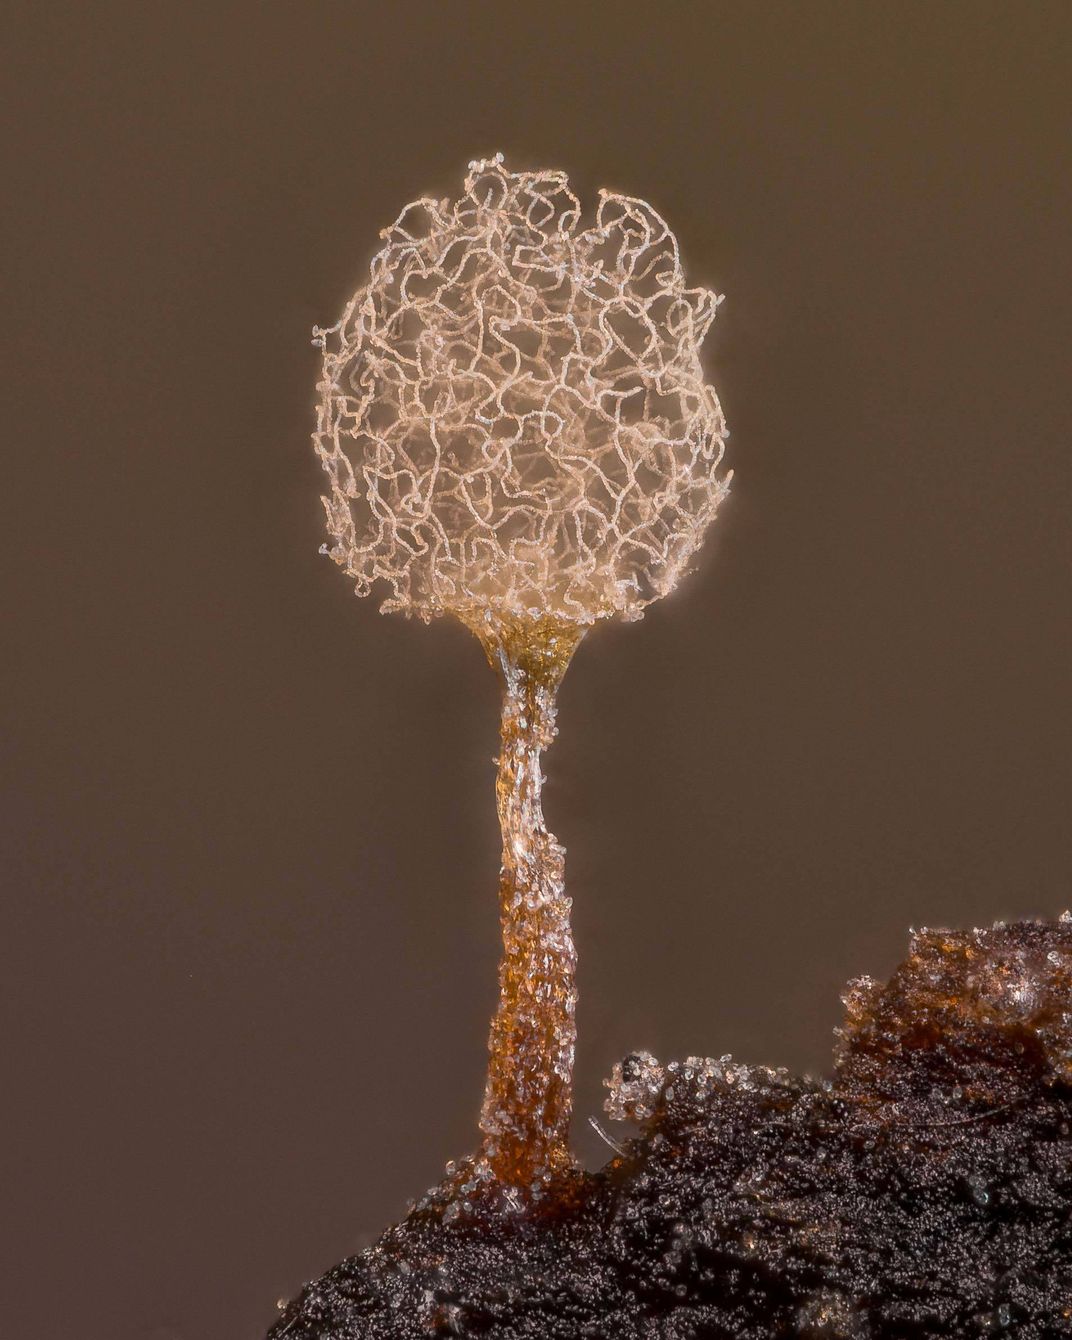 20th Place: “Slime mold (Arcyria pomiformis)” by Alison Pollack